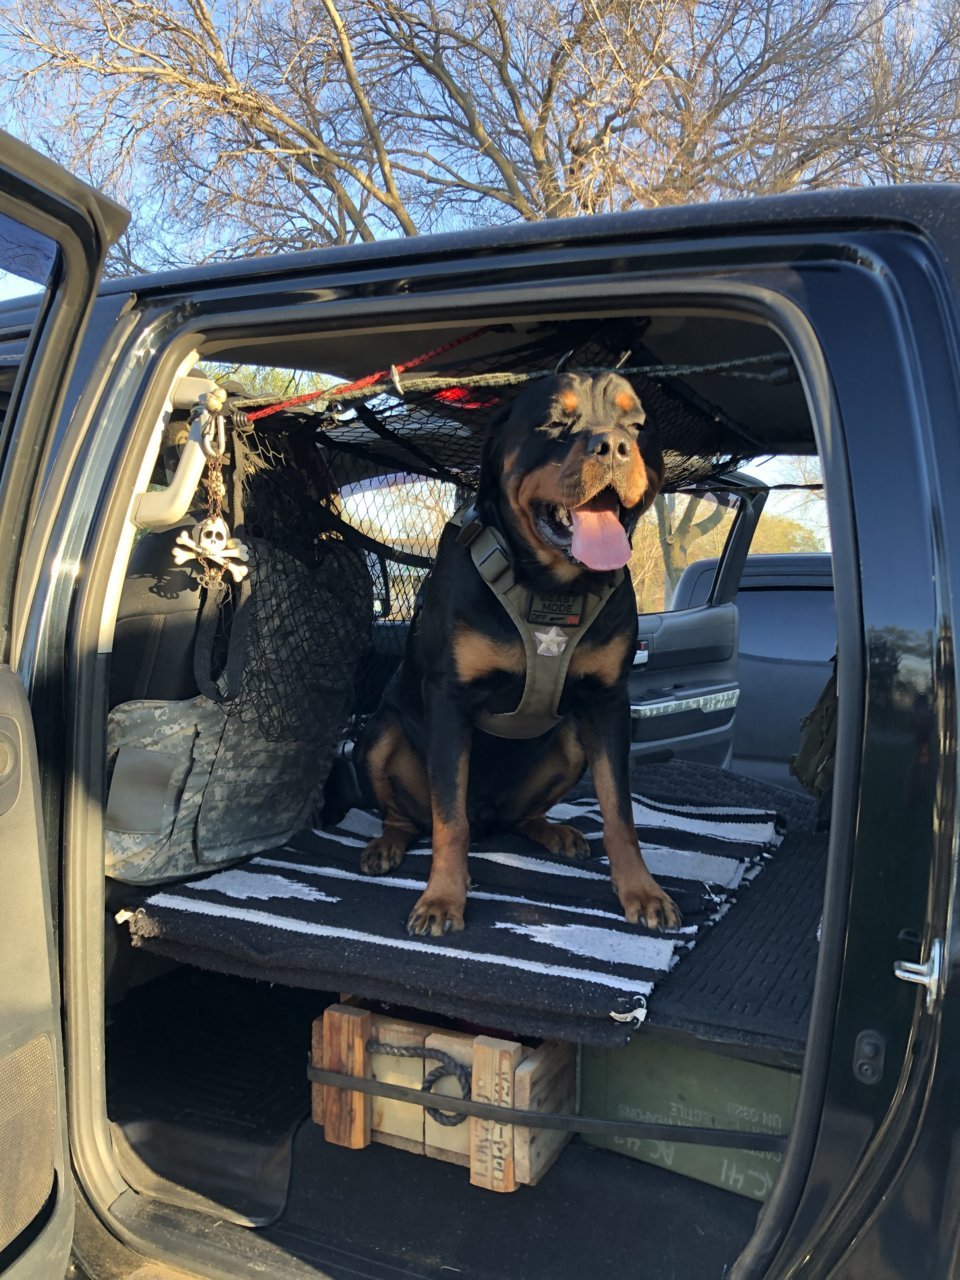 Can a big dog get in the cab without a ramp?